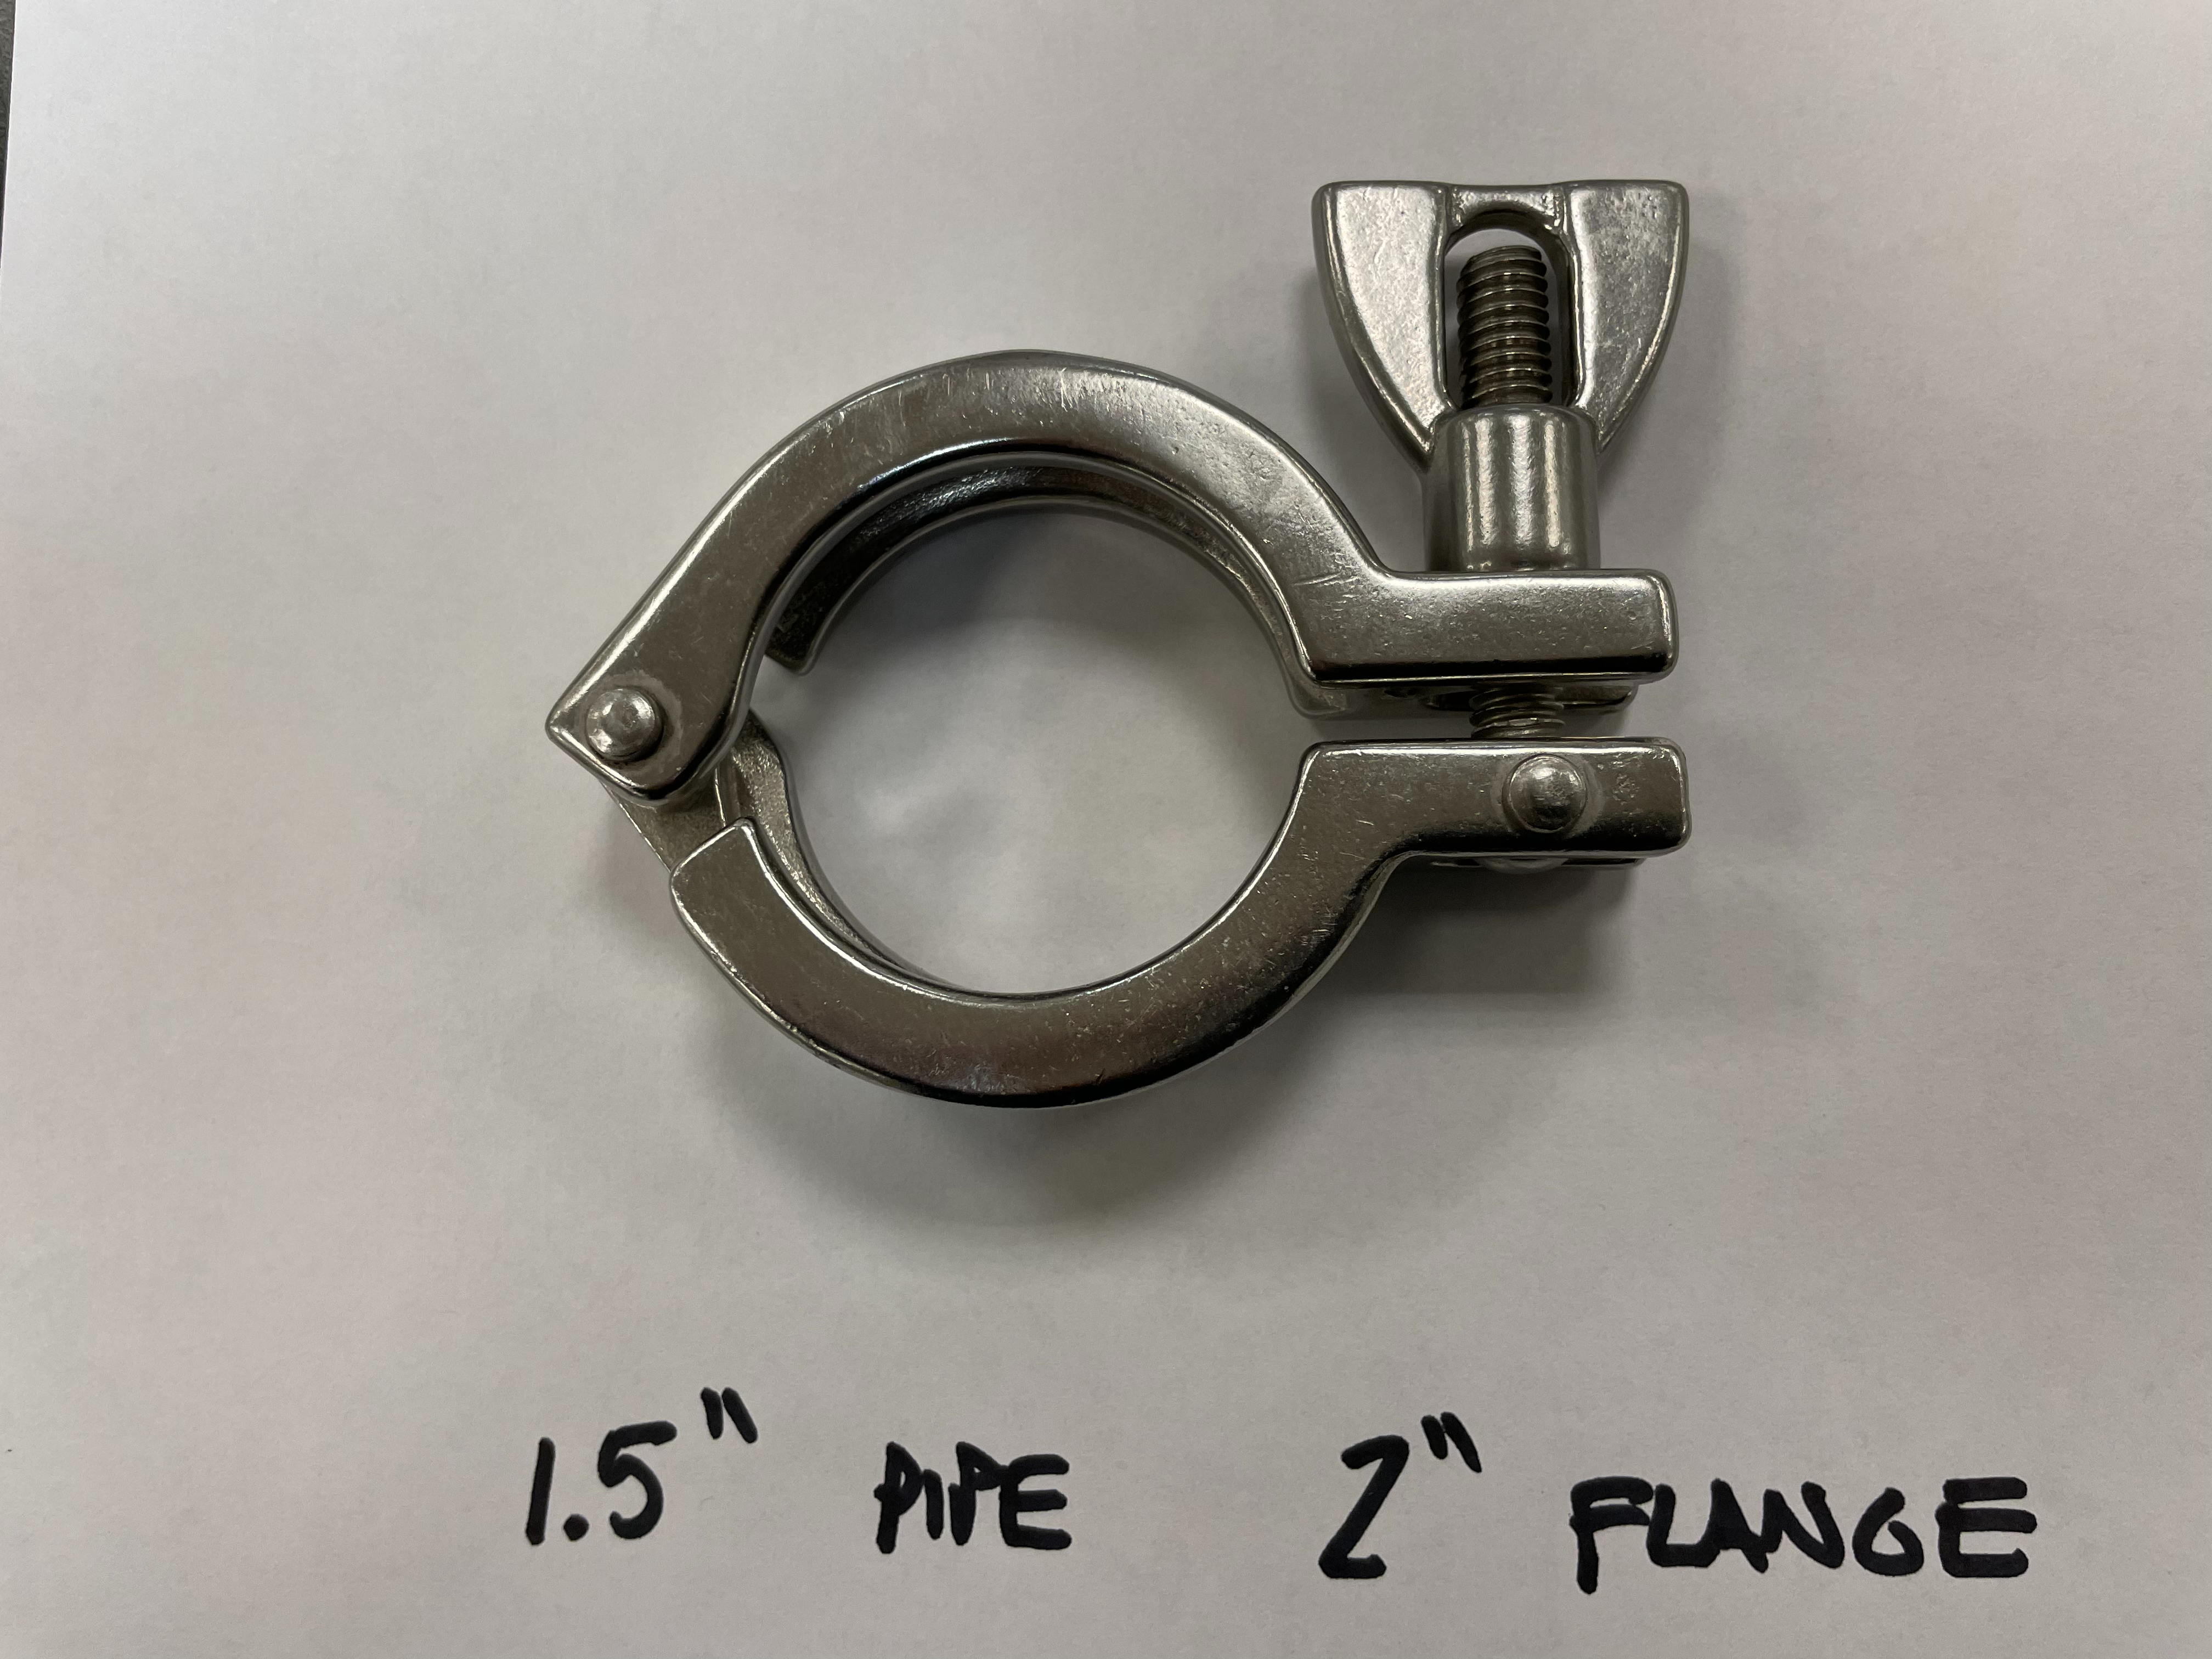 Quick Clamp for Sanitary Tube Fittings - 1.5" Pipe/2" Flange